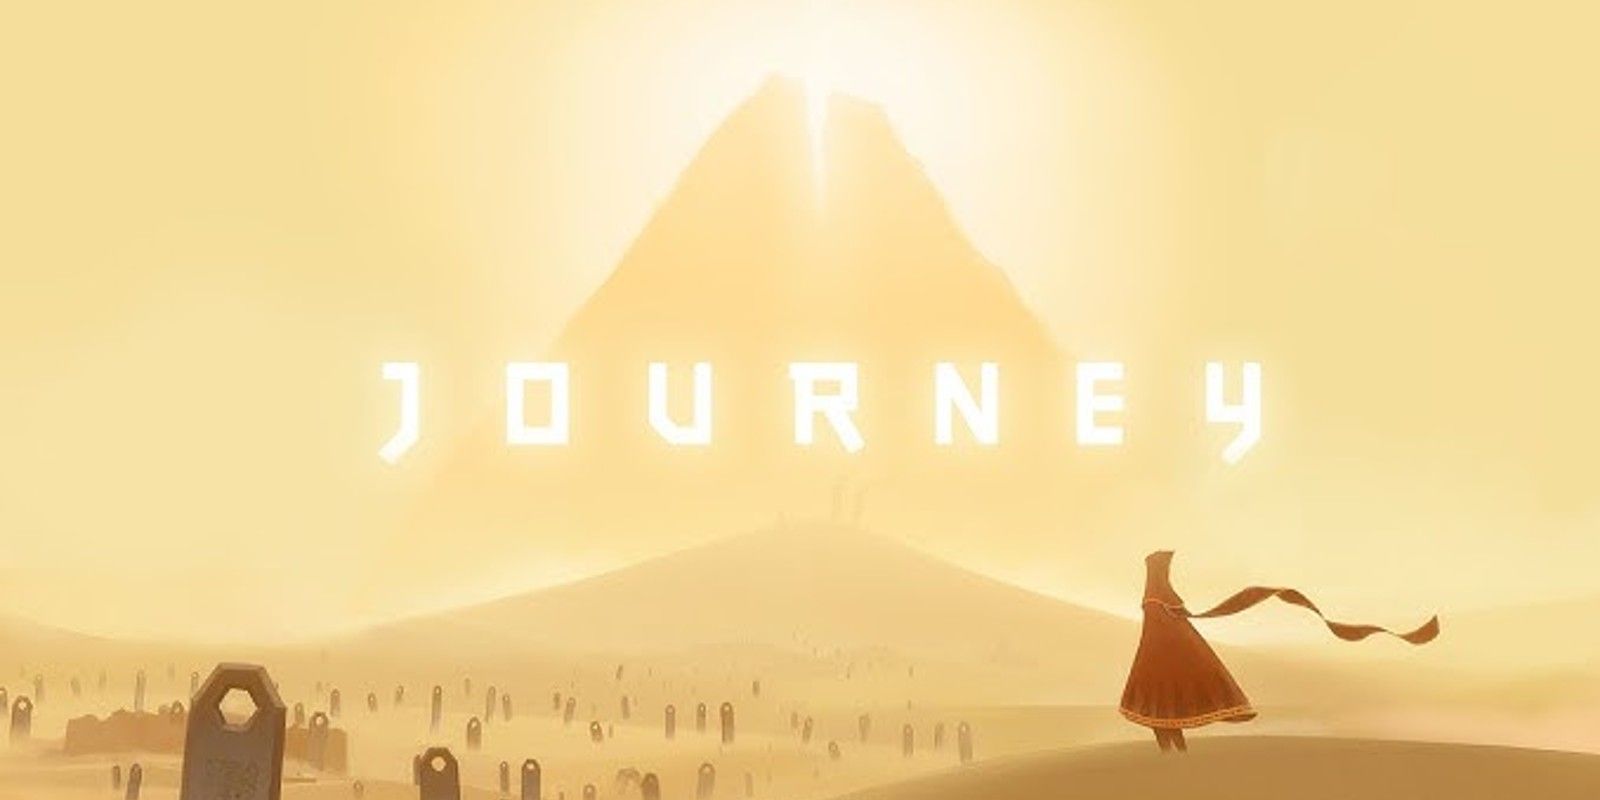 Key art for 2012's Journey. Desert background with the word 